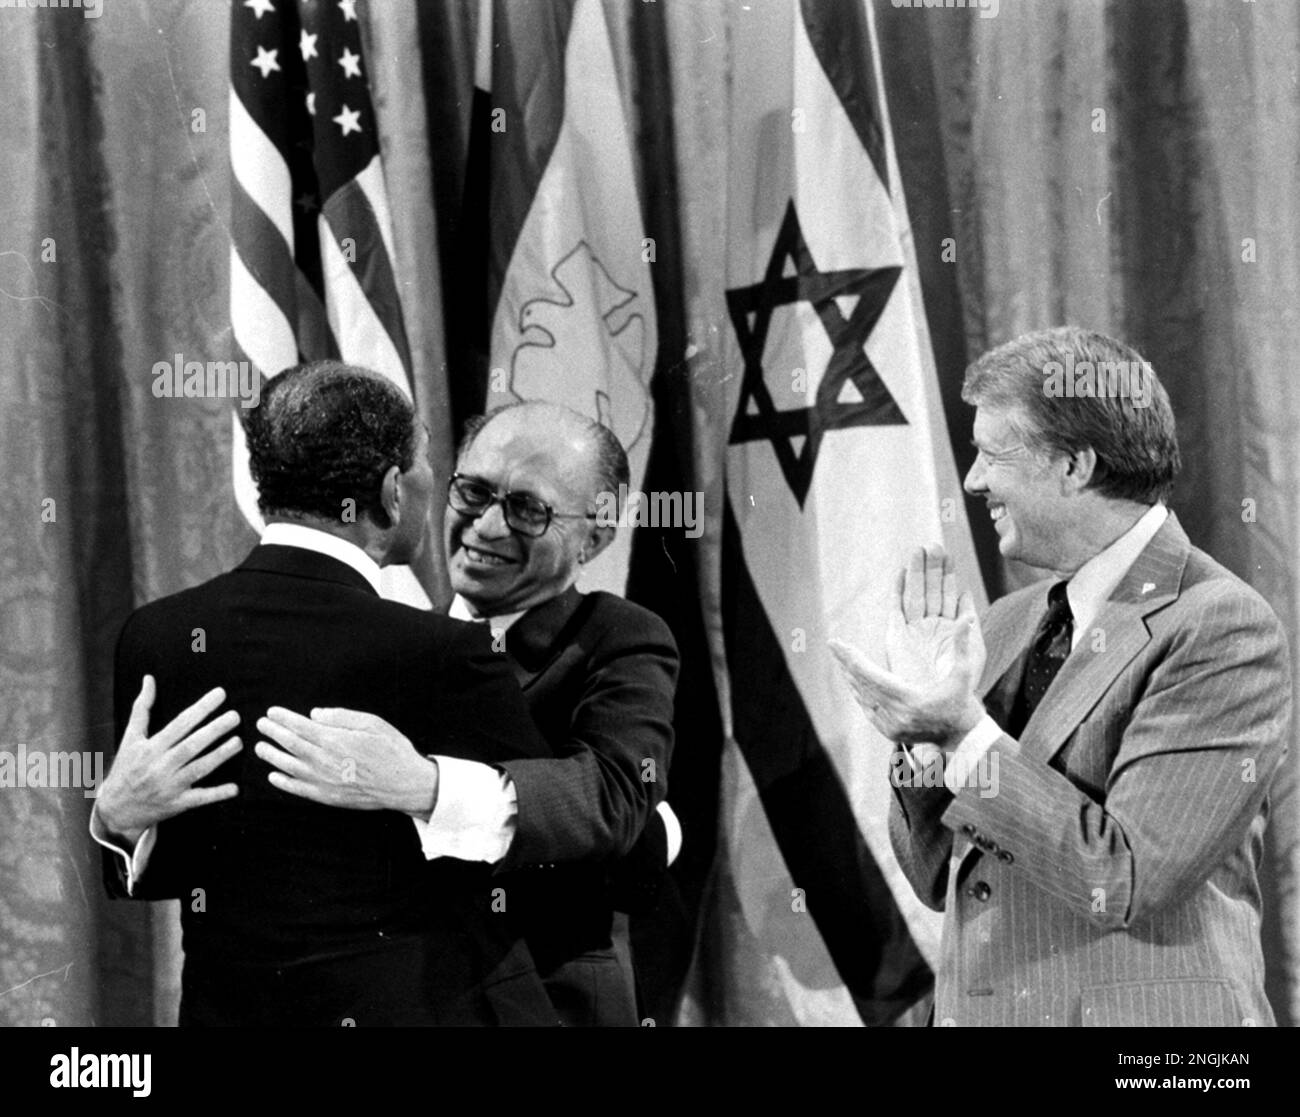 Egyptian President Anwar Sadat, left, and Israeli Prime Minister Menachem Begin, embrace as U.S. President Jimmy Carter looks on, September 18, 1978, during a White House announcement of a Middle East peace agreement reached at the Camp David Summit earlier this year. Sadat and Begin were named joint winners in the 1978 Nobel Peace Prize in an announcement Friday, October 27, from officials in Oslo, Norway. (AP Photo) Stock Photo